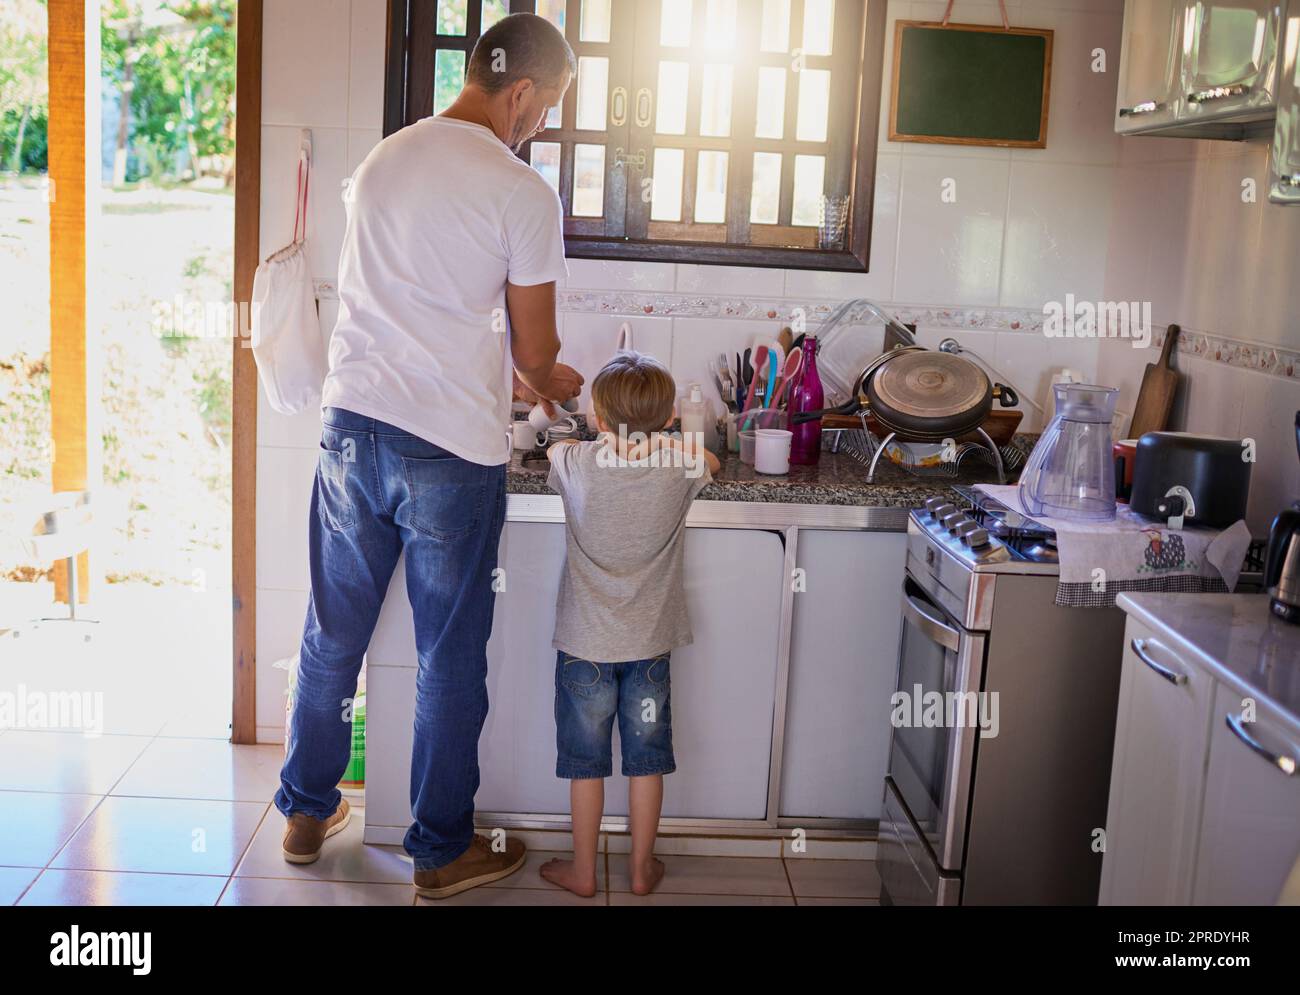 Dads been teaching him how to do the dishes. Rearview shot of a father and his little son washing dishes together at home. Stock Photo